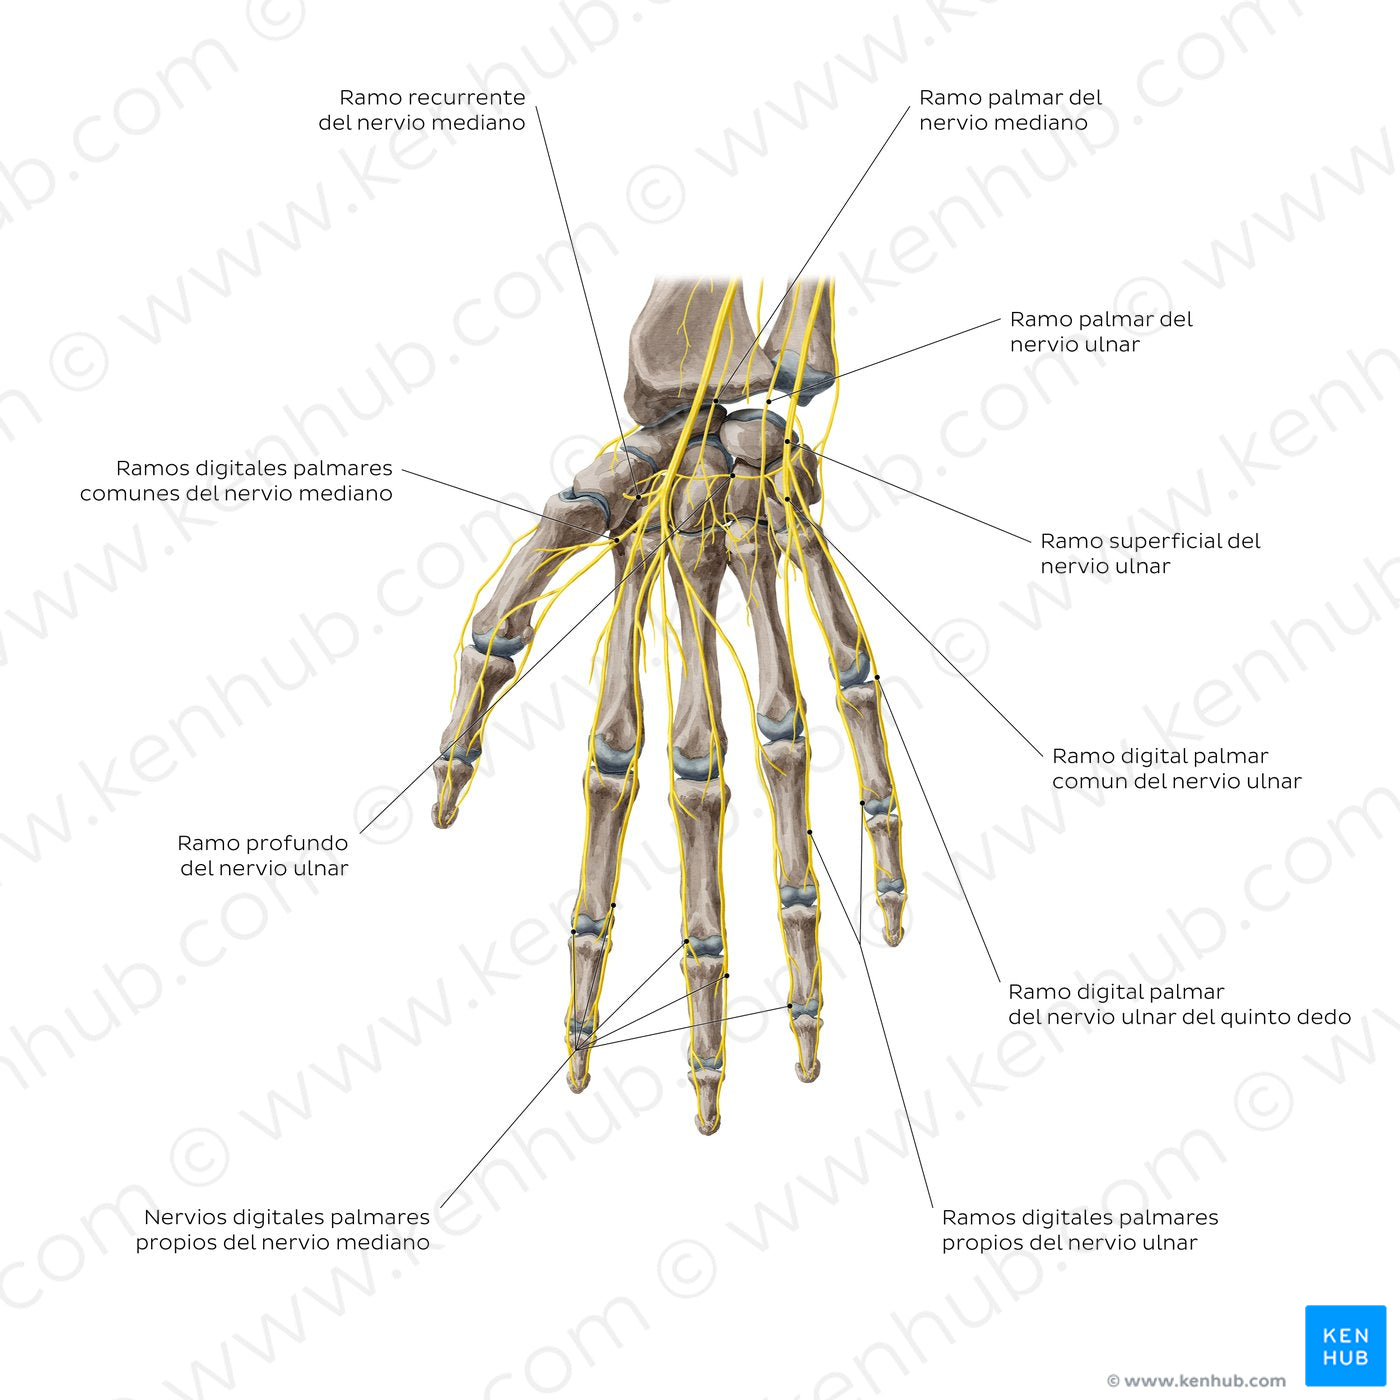 Nerves of the hand: Palmar view (Spanish)